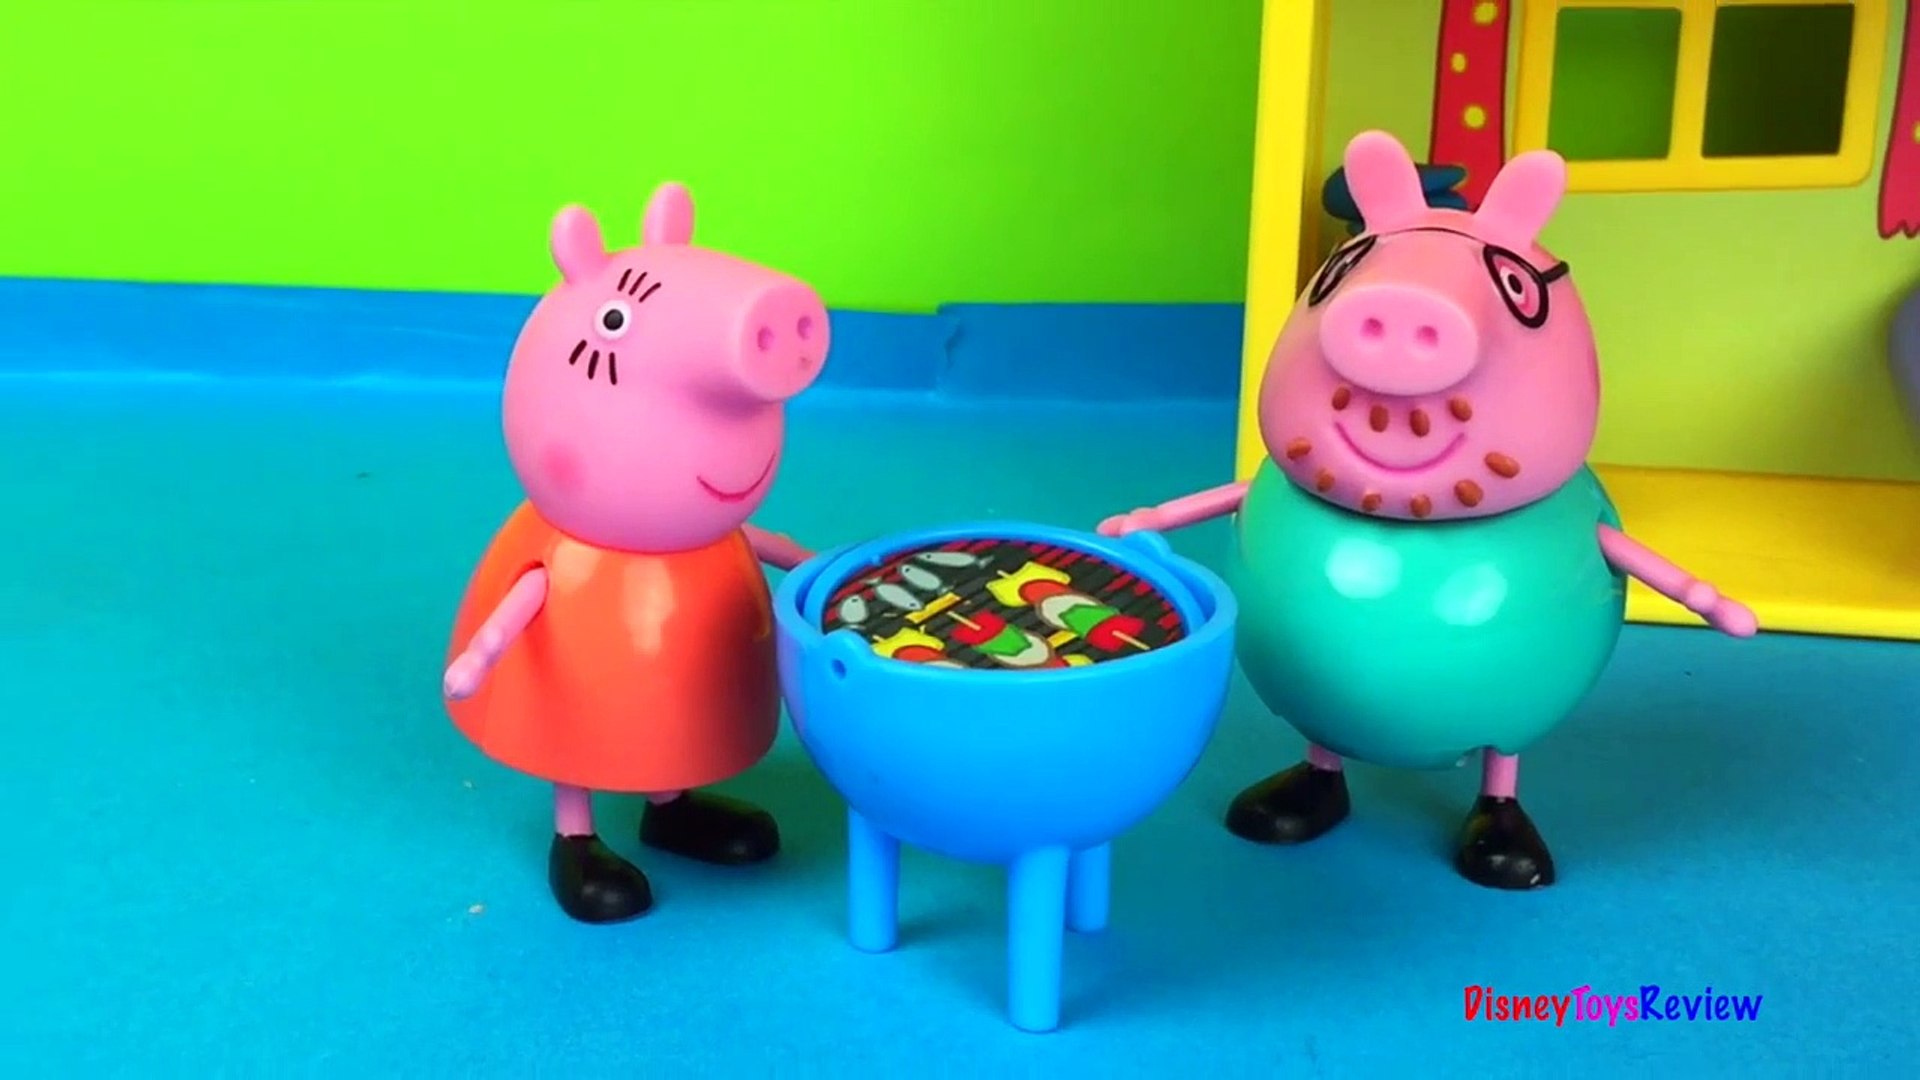 PEPPA PIG'S HOUSE STORY WITH PEPPA PIG GEORGE PIG MAMA PIG PAPA PIG - PEPPA  AND GEORGE STAY UP LATE-rm_Xm-Aoc - video Dailymotion